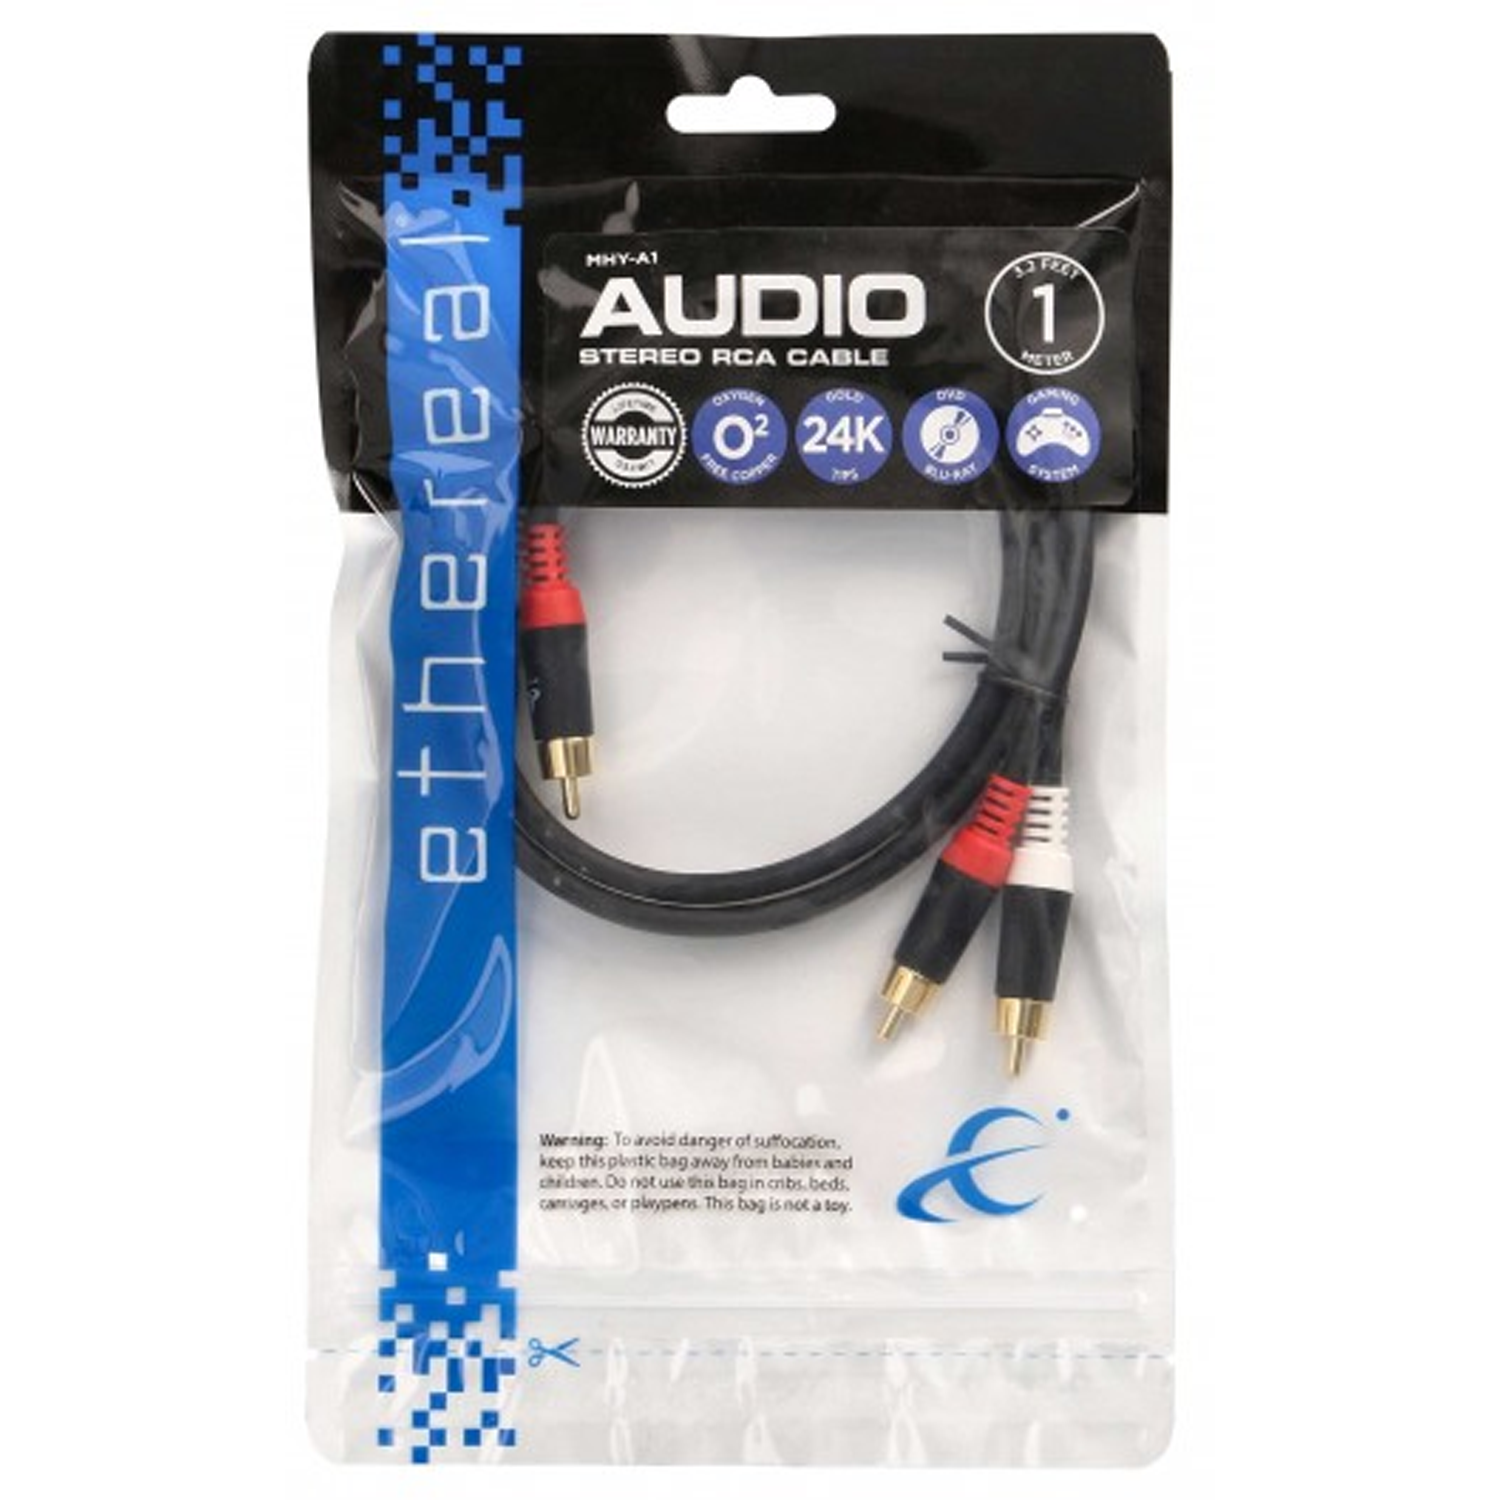 ETHEREAL MHY-A 3ft RCA Stereo Cable | Accessories4less